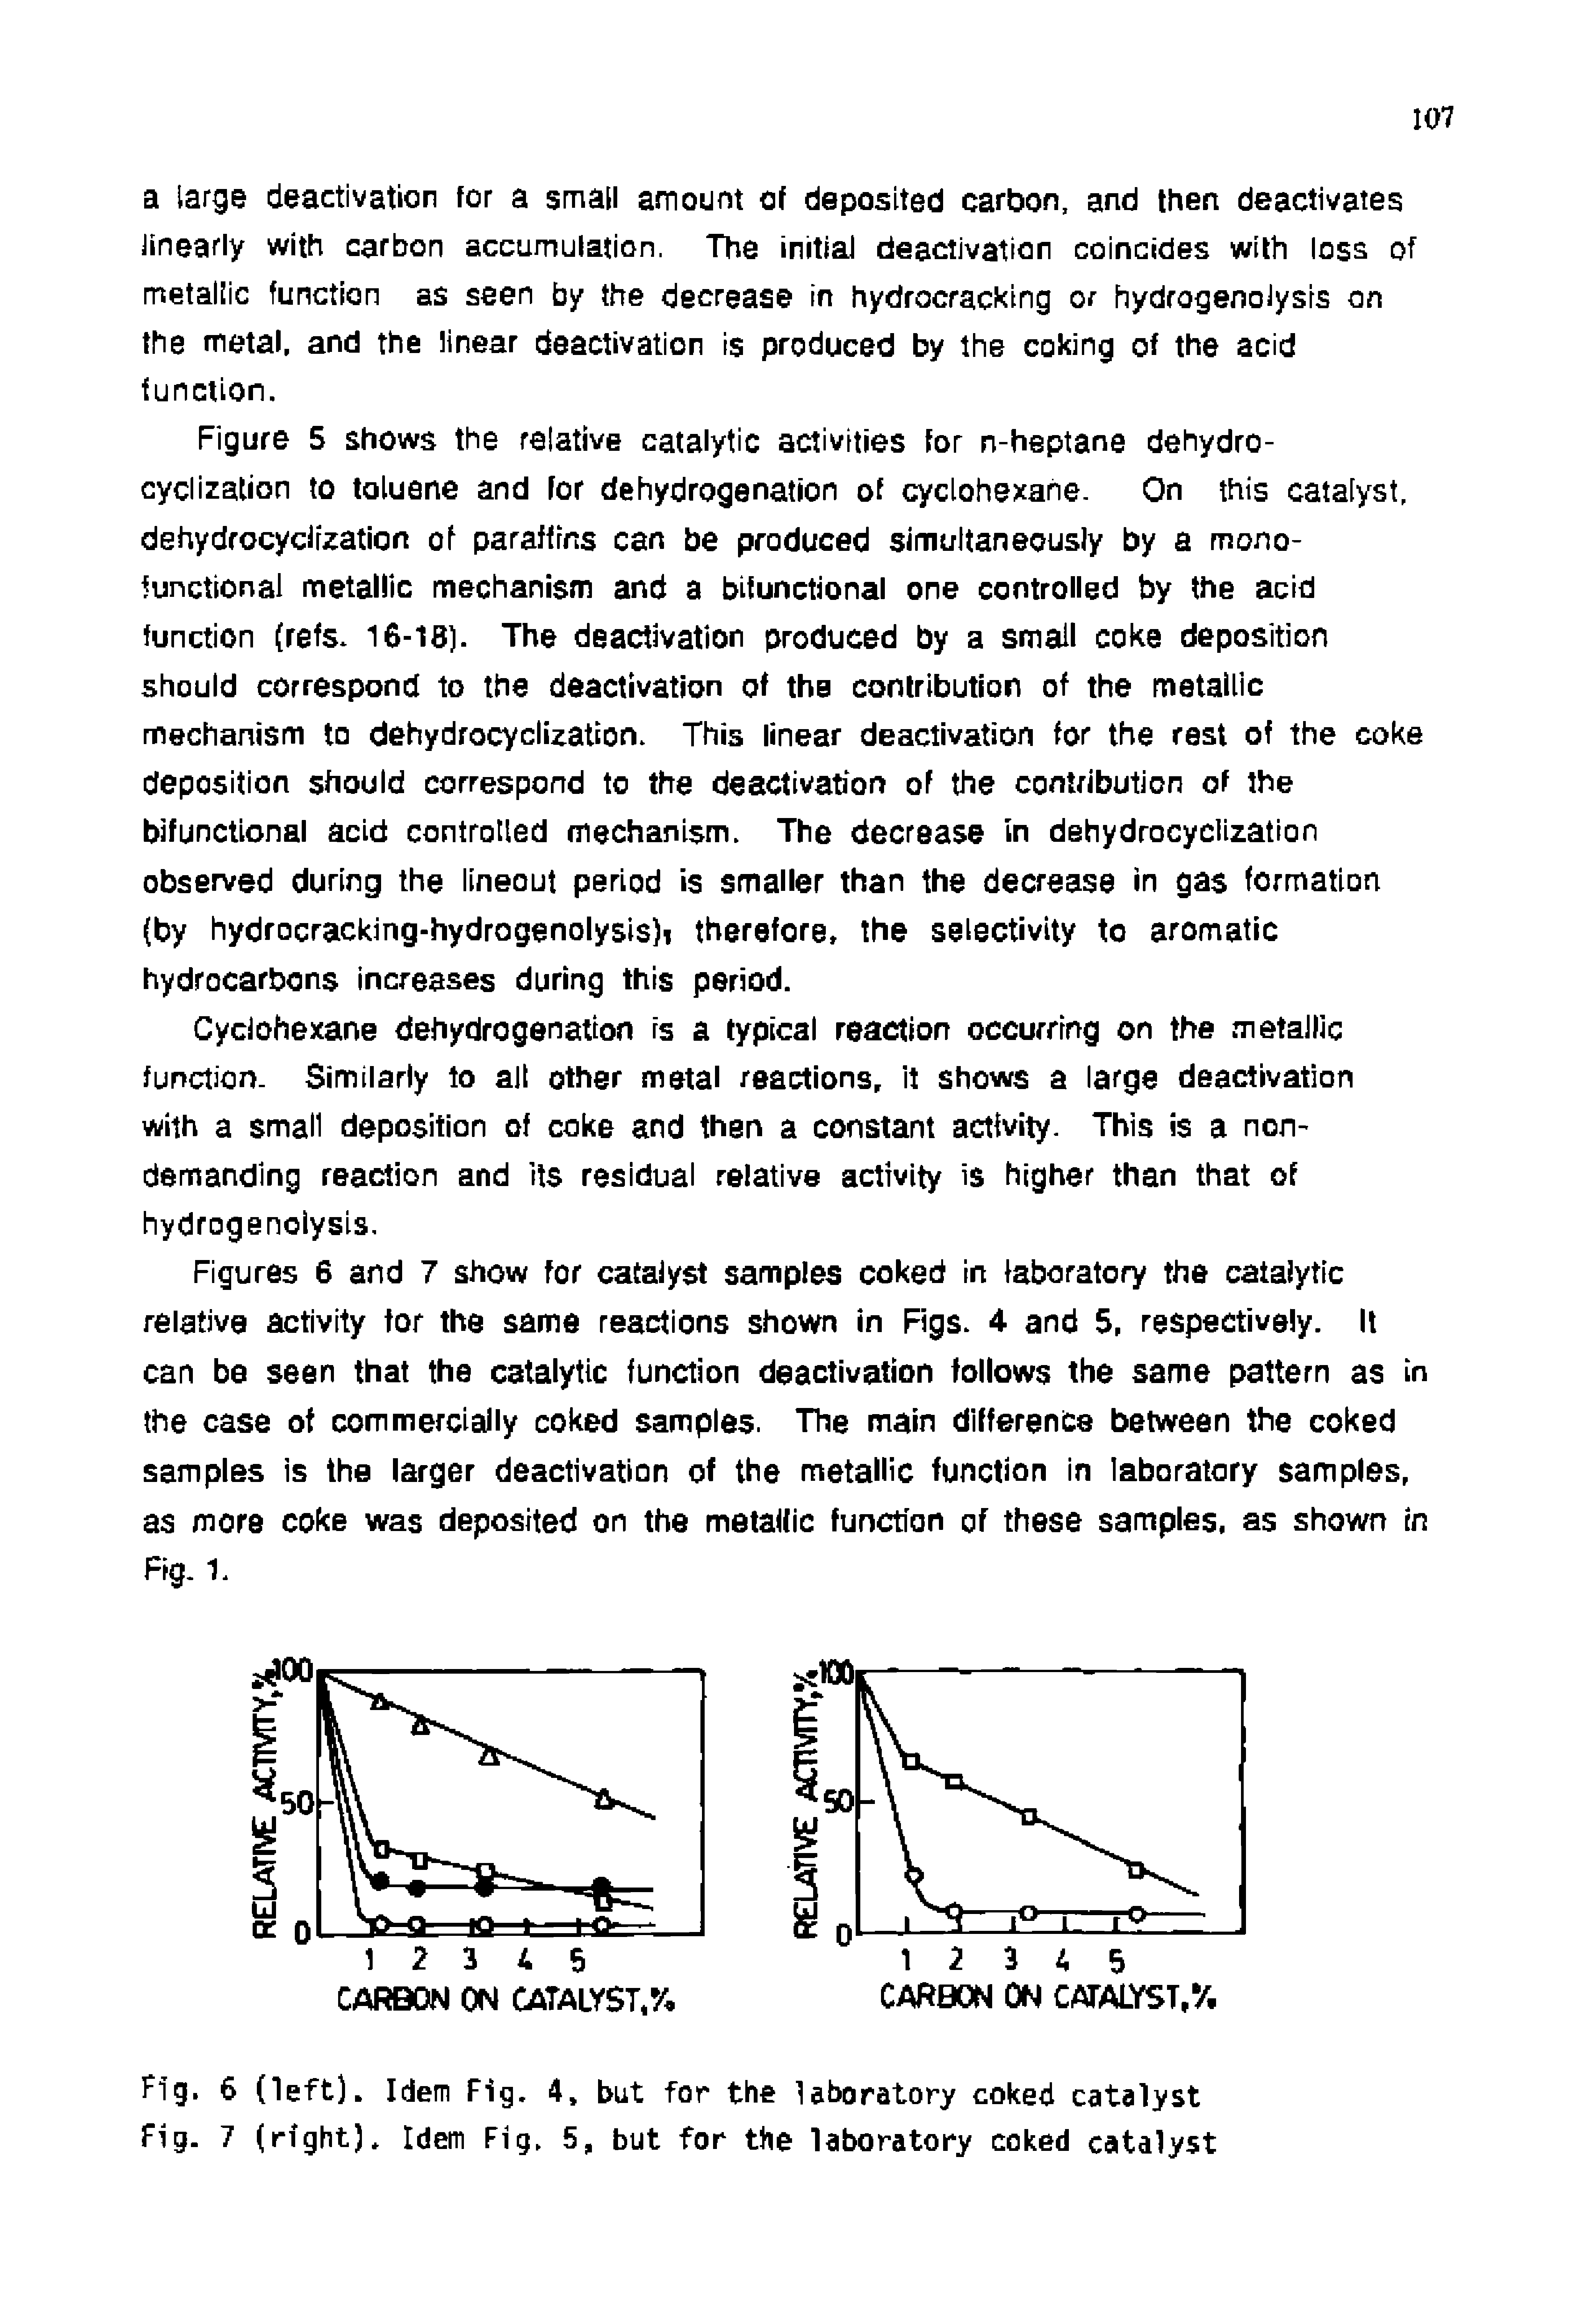 Figures 6 and 7 show for catalyst samples coked in laboratory the catalytic relative activity tor the same reactions shown in Figs. 4 and 5, respectively. It can be seen that the catalytic function deactivation follows the same pattern as in the case of commercially coked samples. The main difference between the coked samples is the larger deactivation of the metallic function in laboratory samples, as more coke was deposited on the metallic function of these samples, as shown tn Fig. 1.